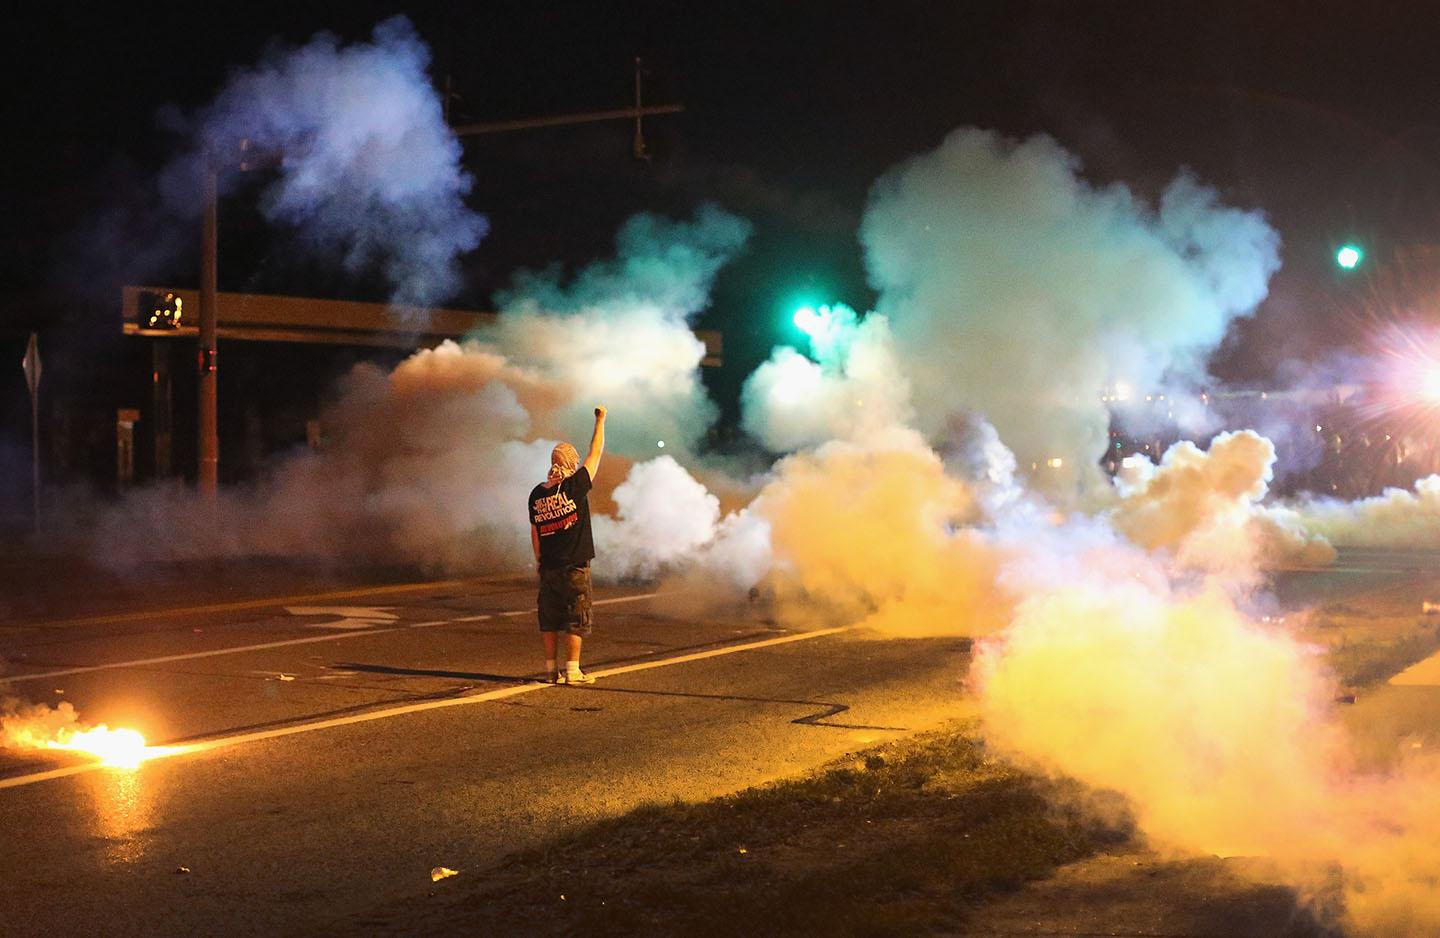 A demonstrator, protesting the death of teenager Michael Brown, stands his ground as police fire tear gas on August 13, 2014 in Ferguson, Missouri. 